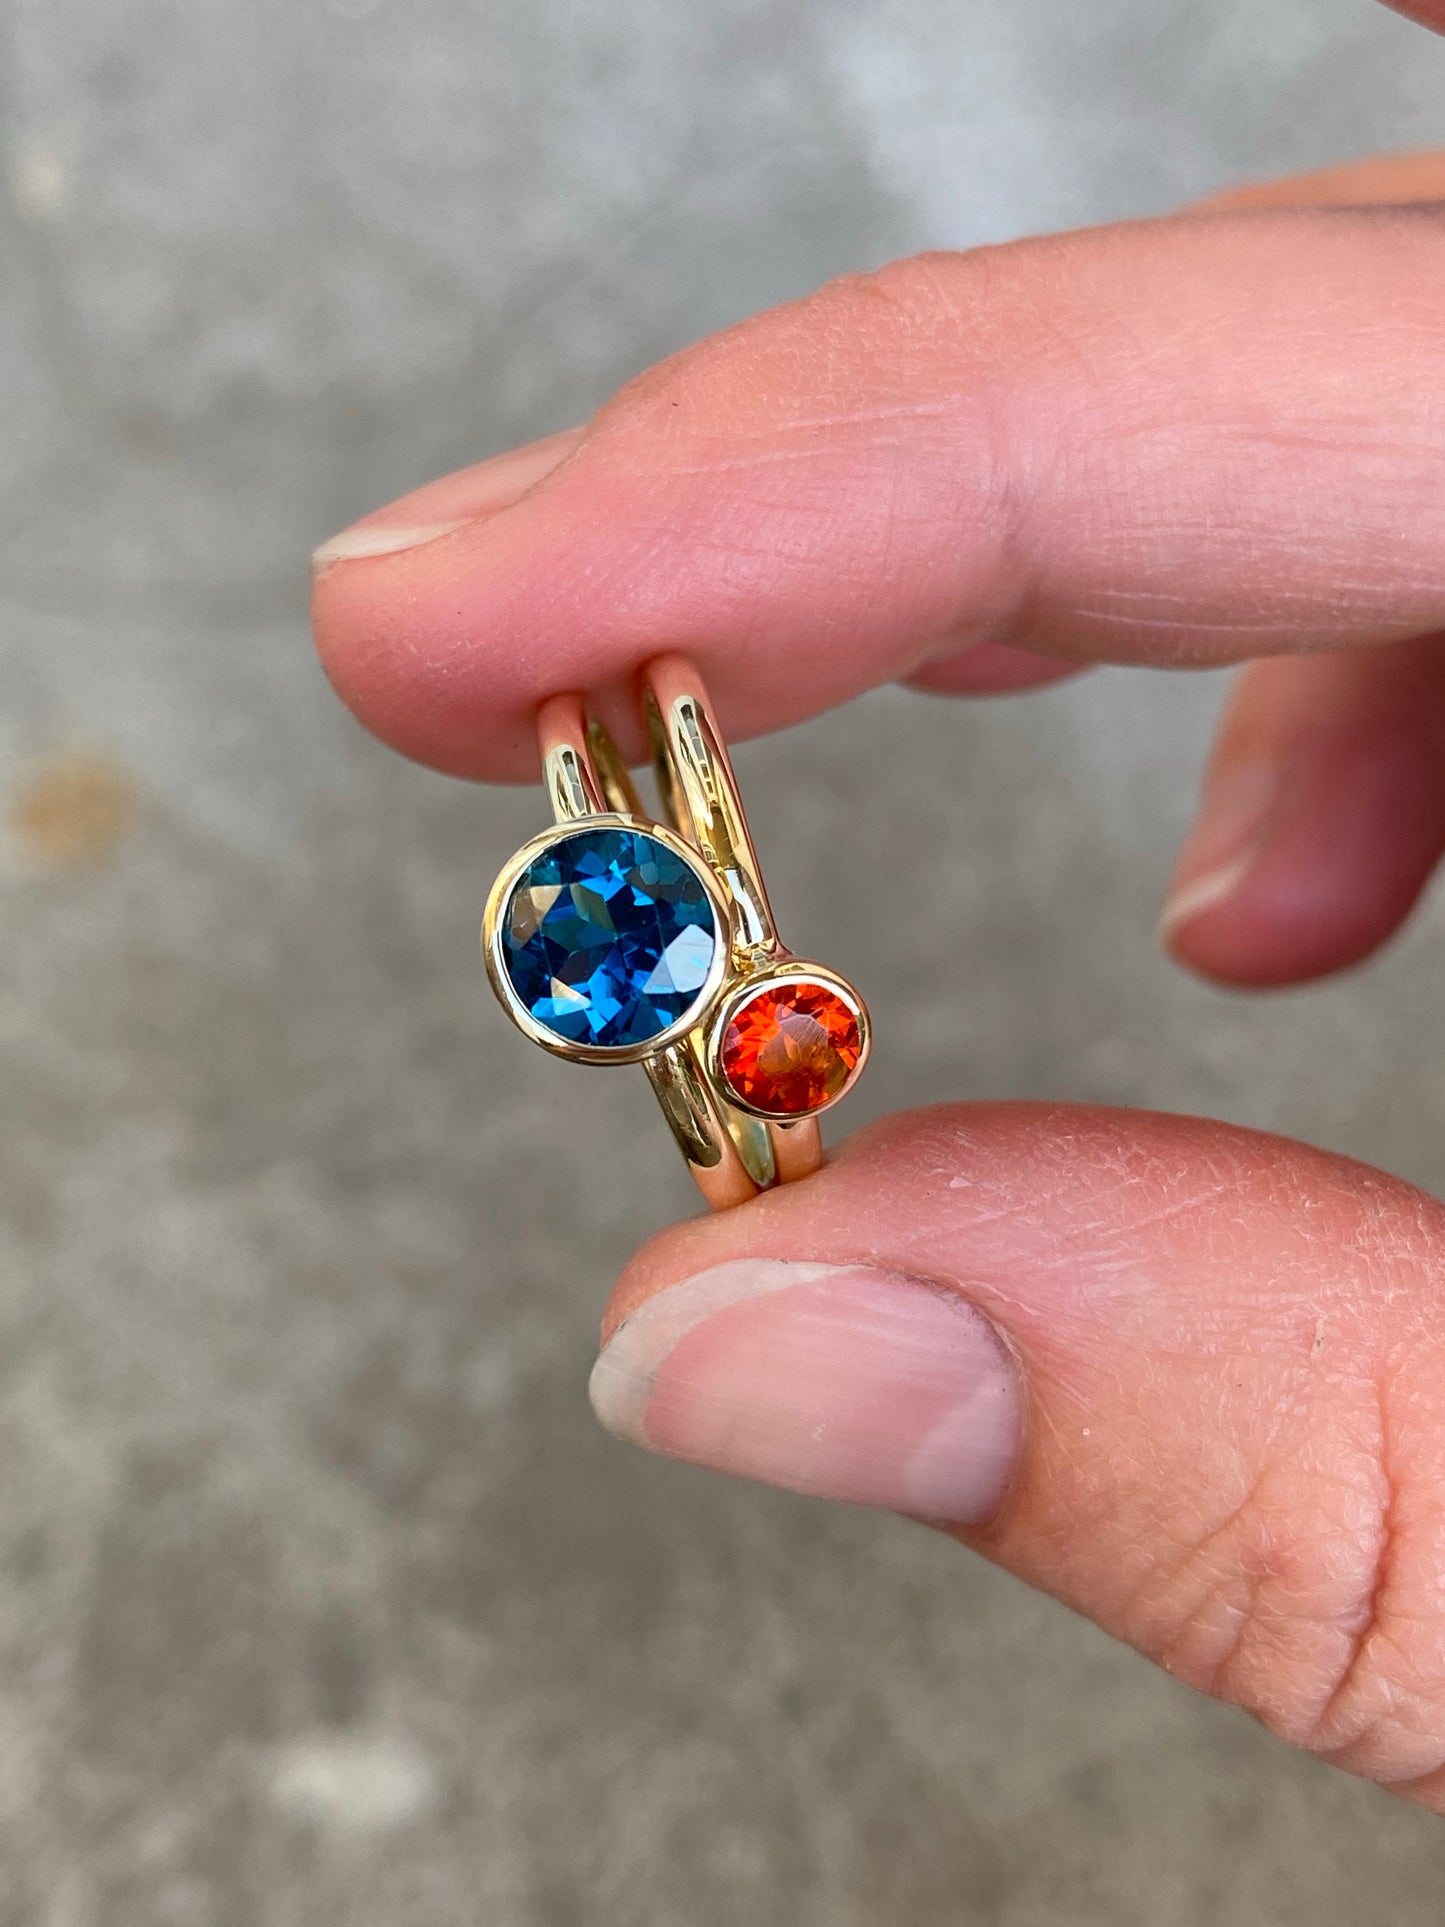 14k yellow gold ring set with a london blue topaz